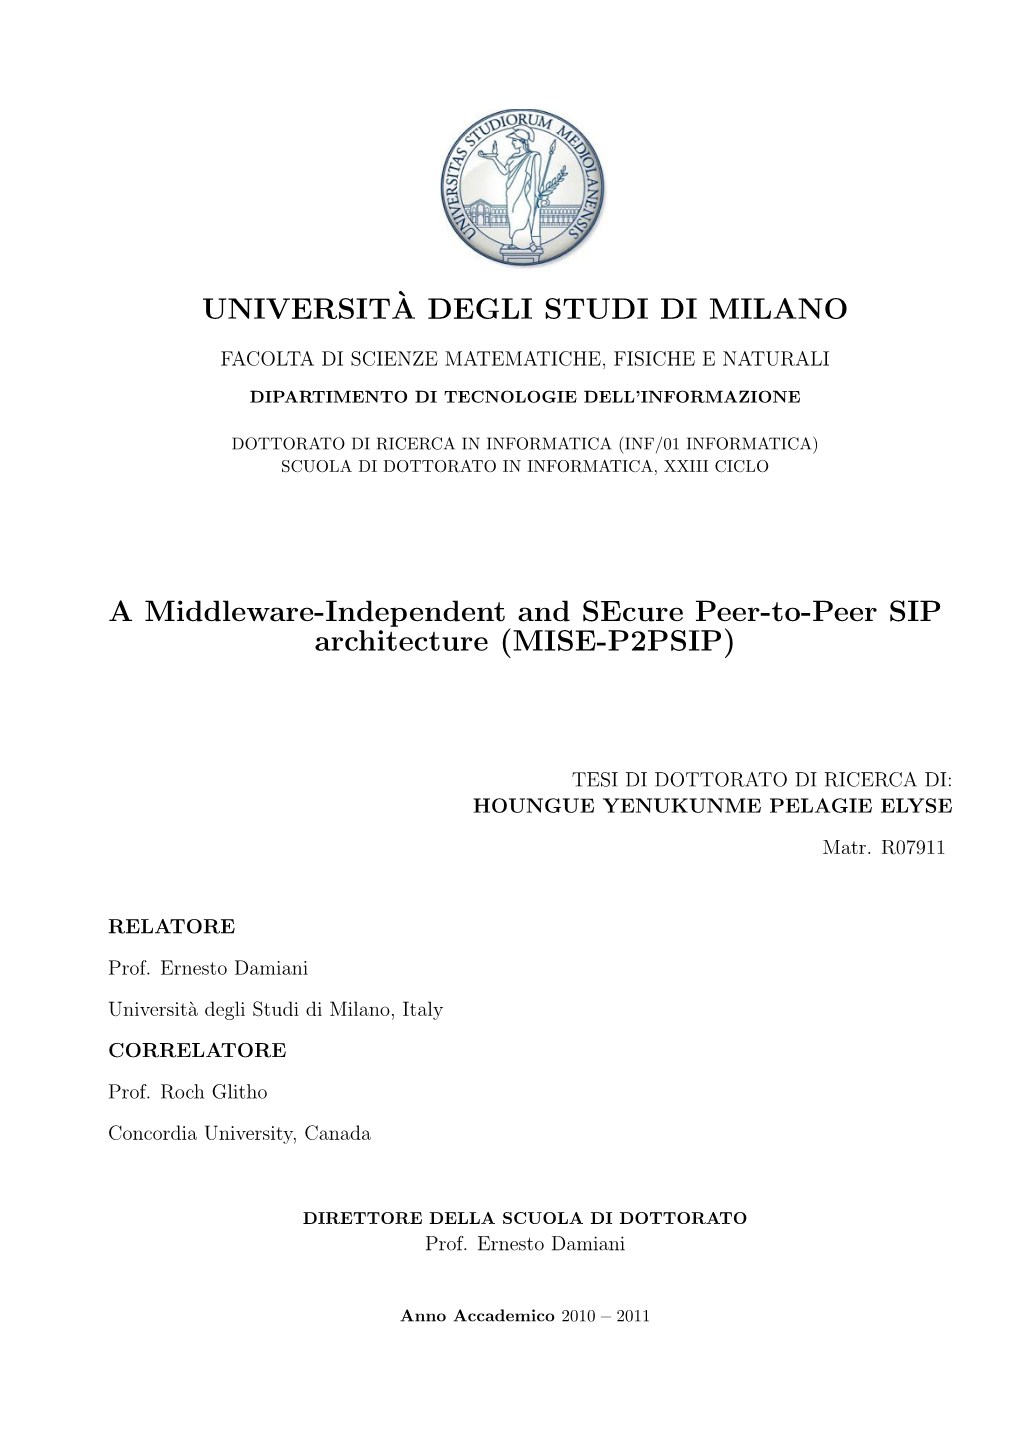 UNIVERSIT`A DEGLI STUDI DI MILANO a Middleware-Independent and Secure Peer-To-Peer SIP Architecture (MISE-P2PSIP)